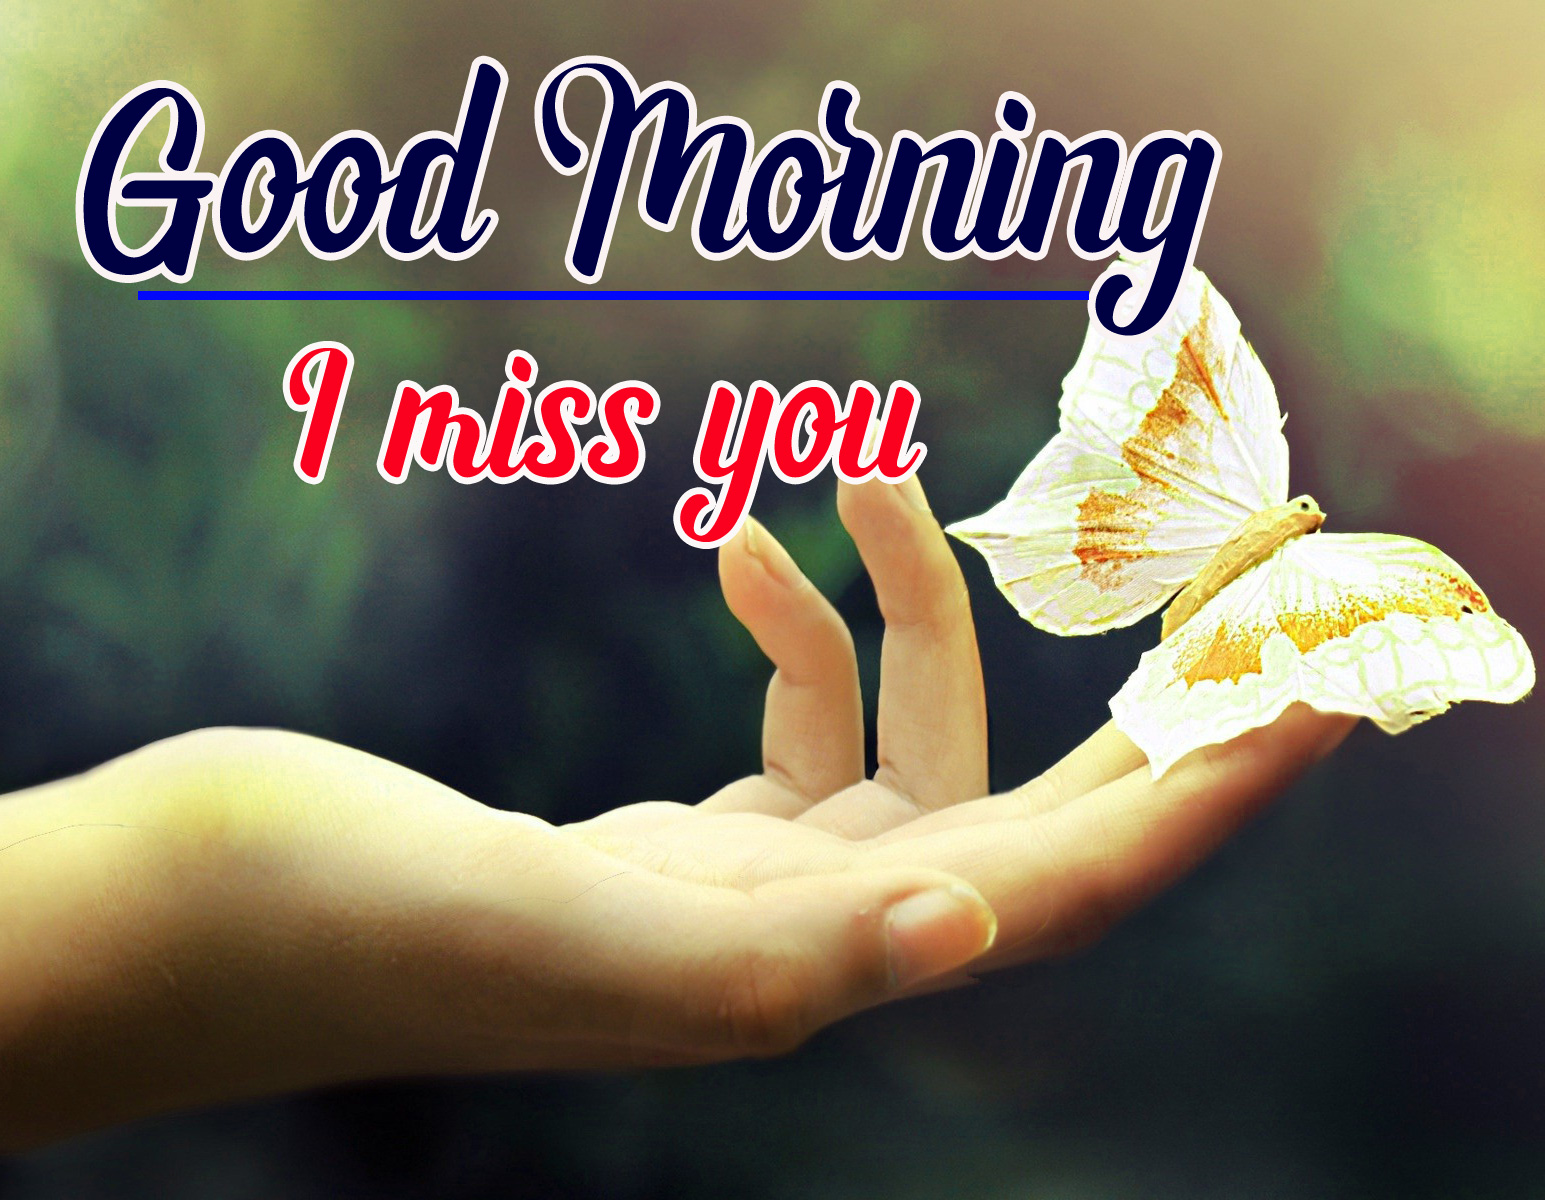 Love Good Morning Pictures Pics Download 